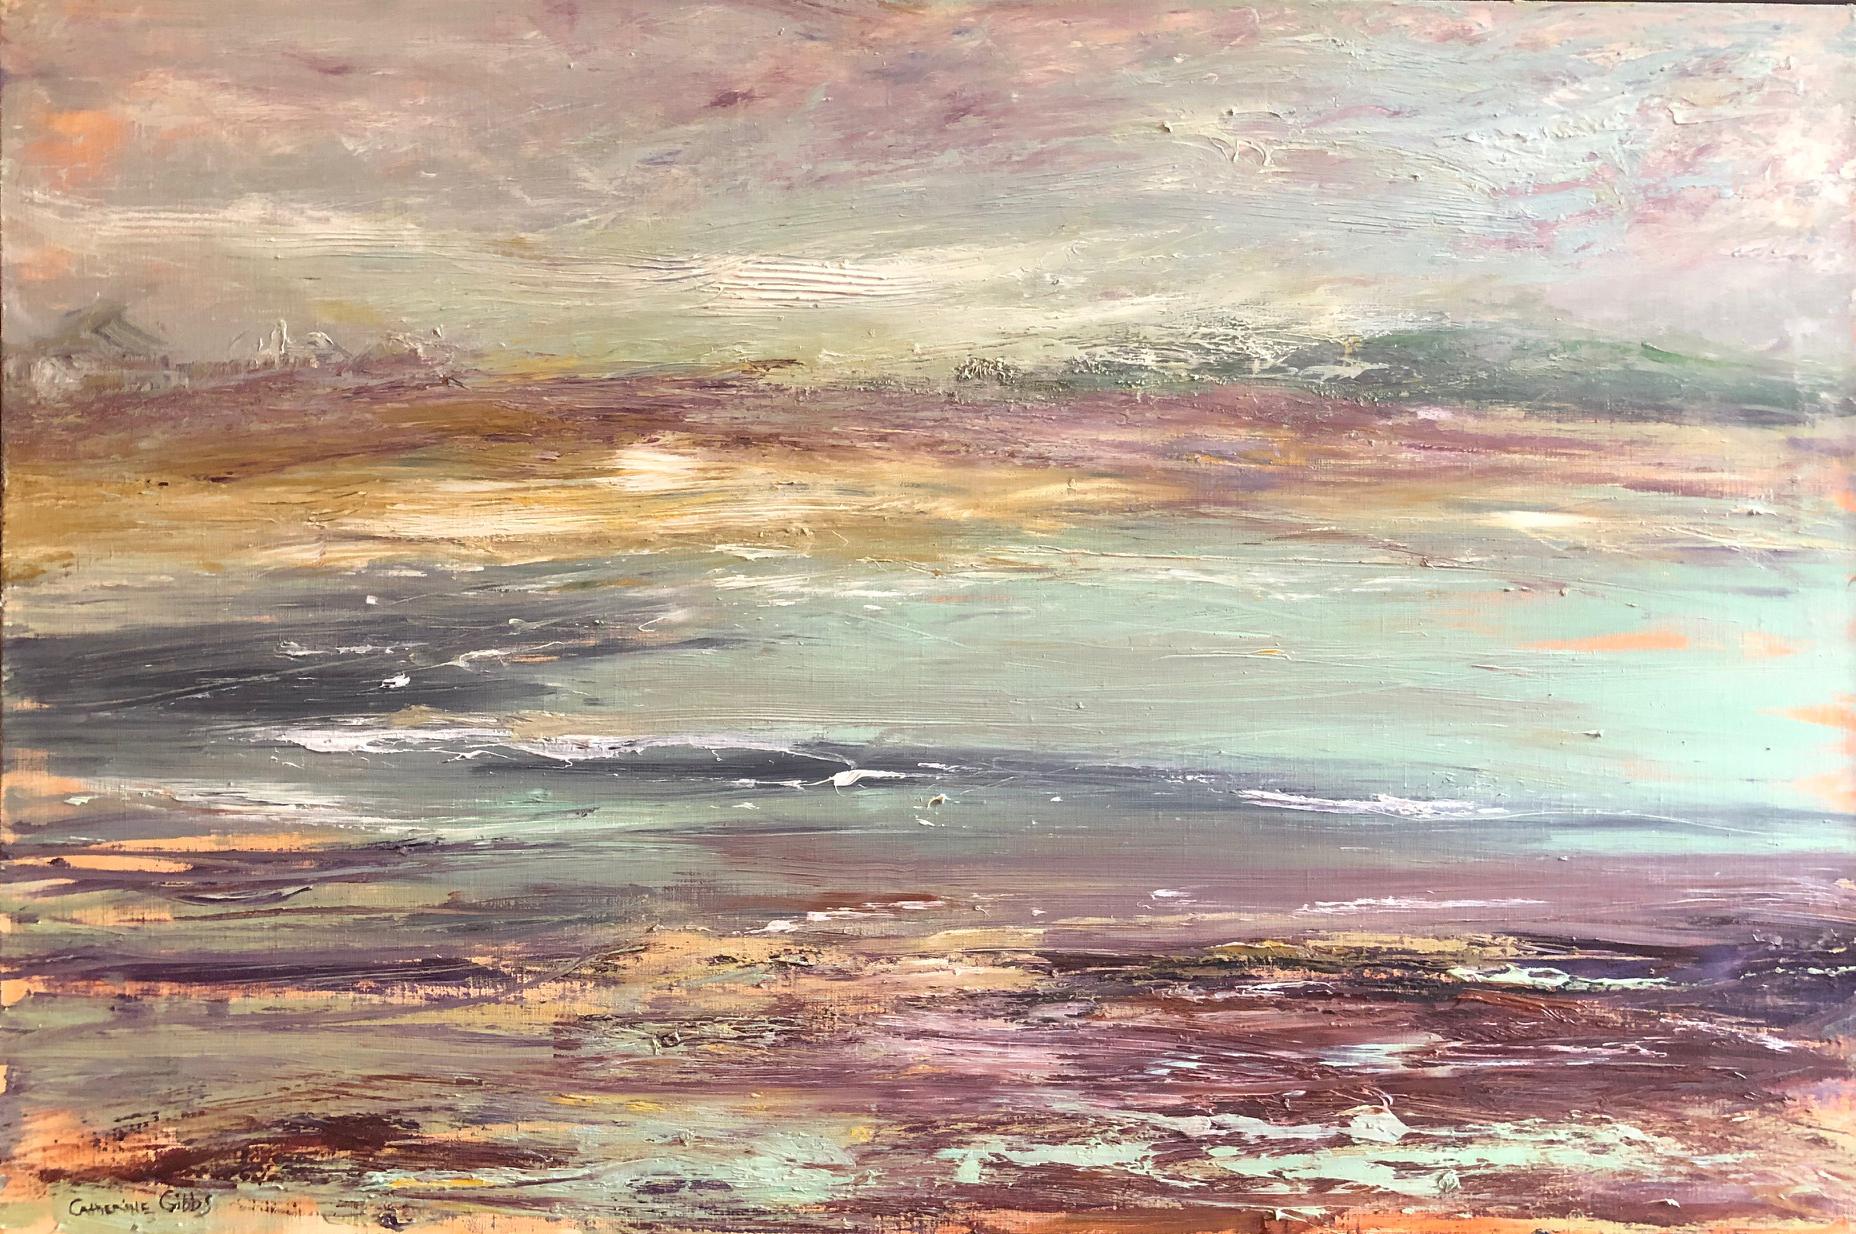 Catherine Picard-Gibbs Abstract Painting - "Fog Rising", oil painting, beach, New England, landscape, blues, grays, browns